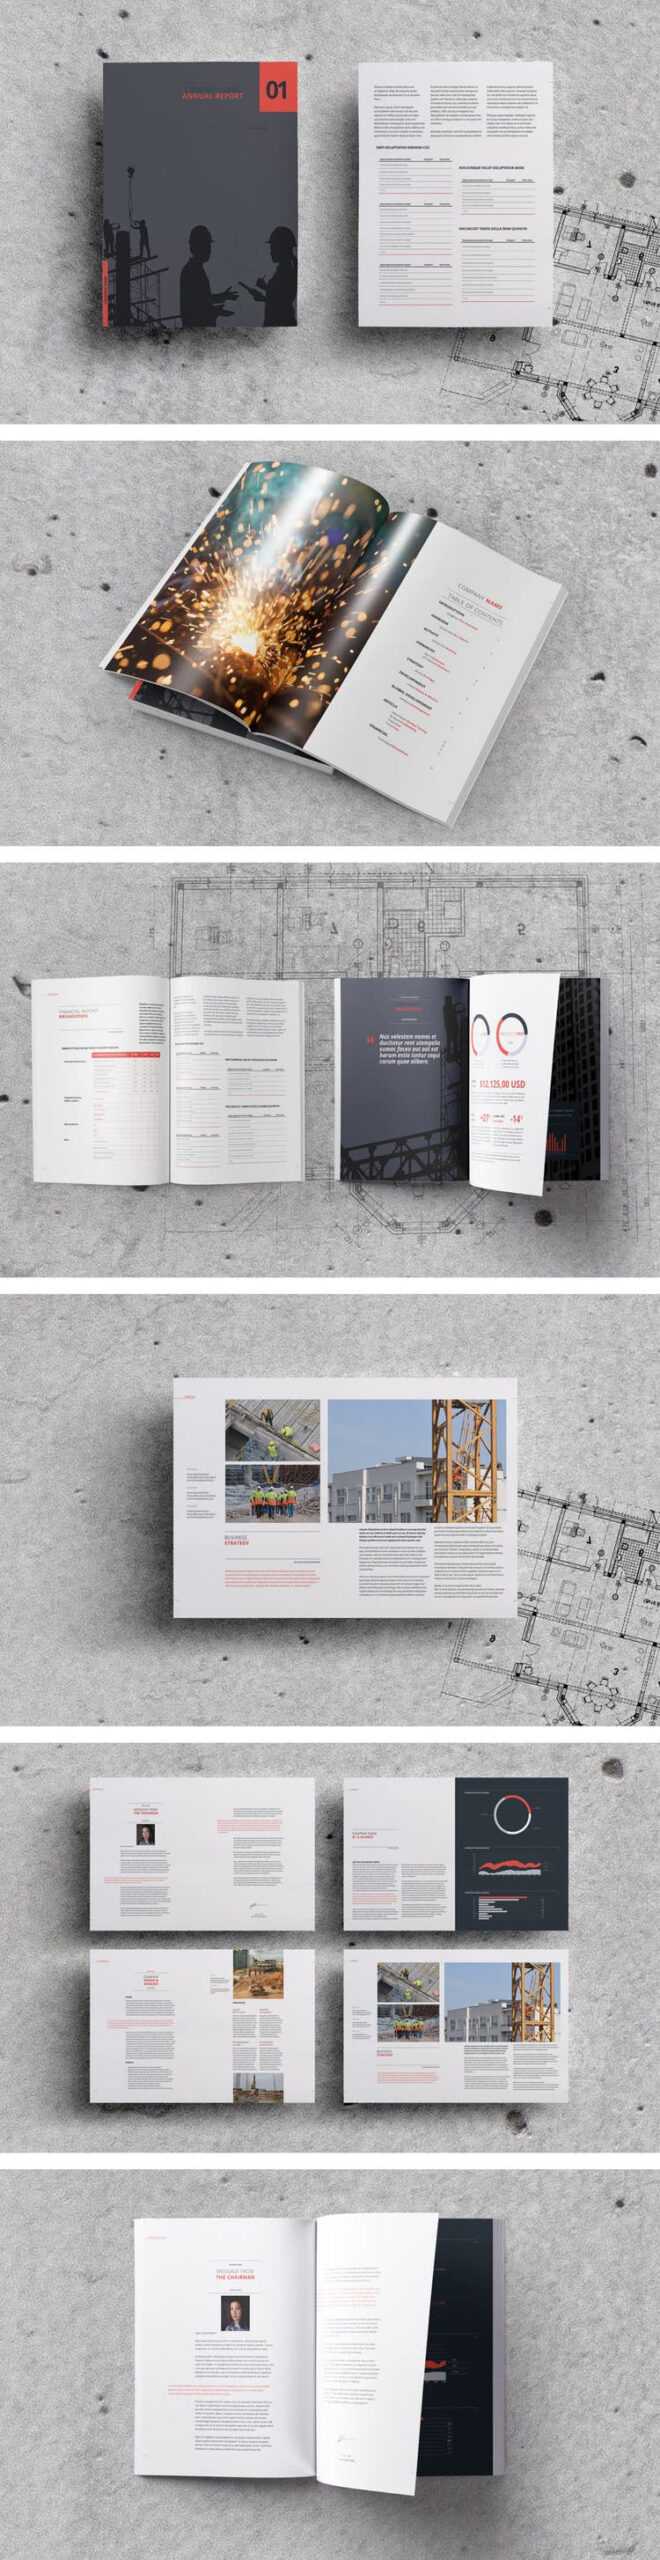 75 Fresh Indesign Templates And Where To Find More For Free Annual Report Template Indesign